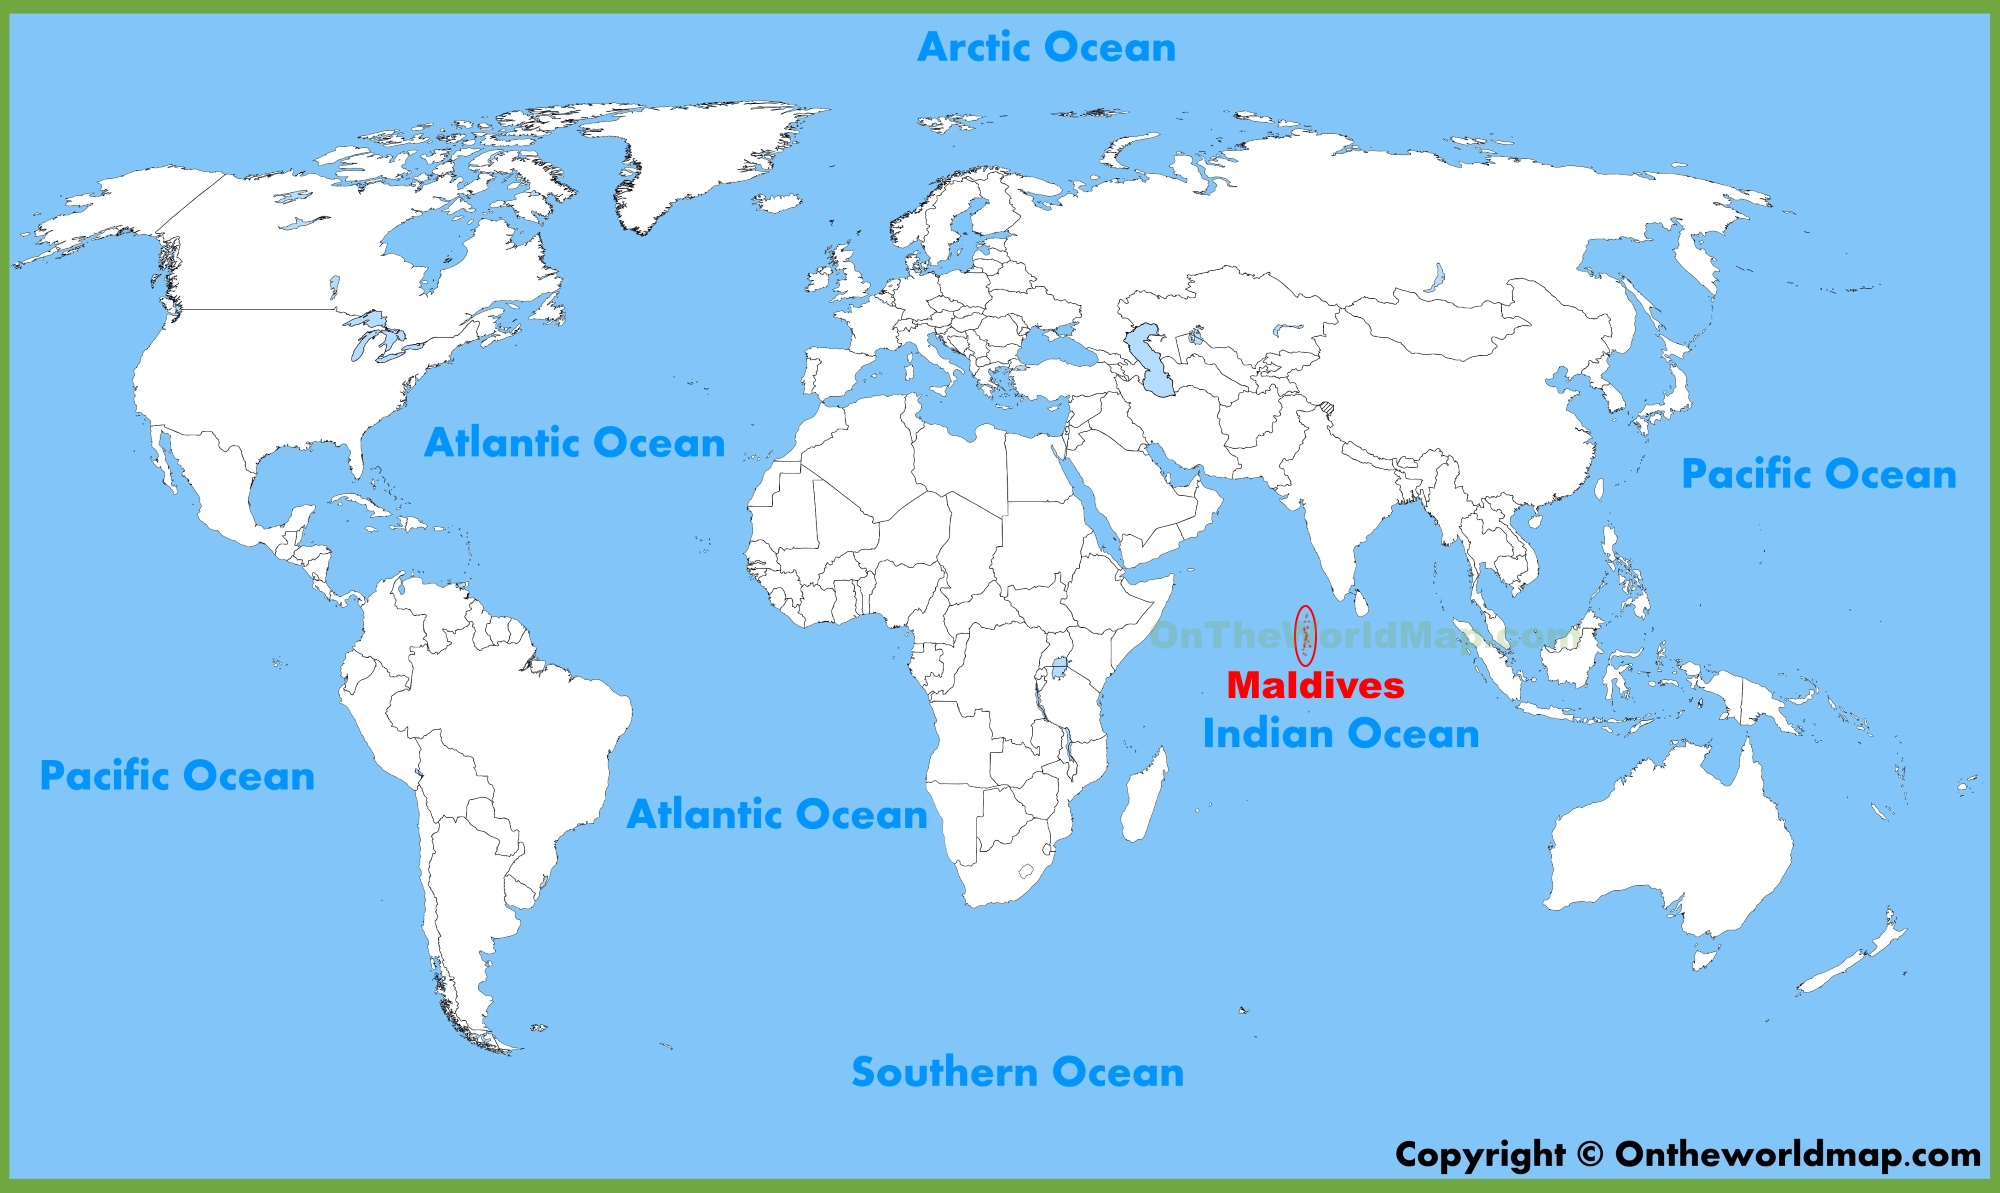 Geographical Location of Maldives in the Indian Ocean